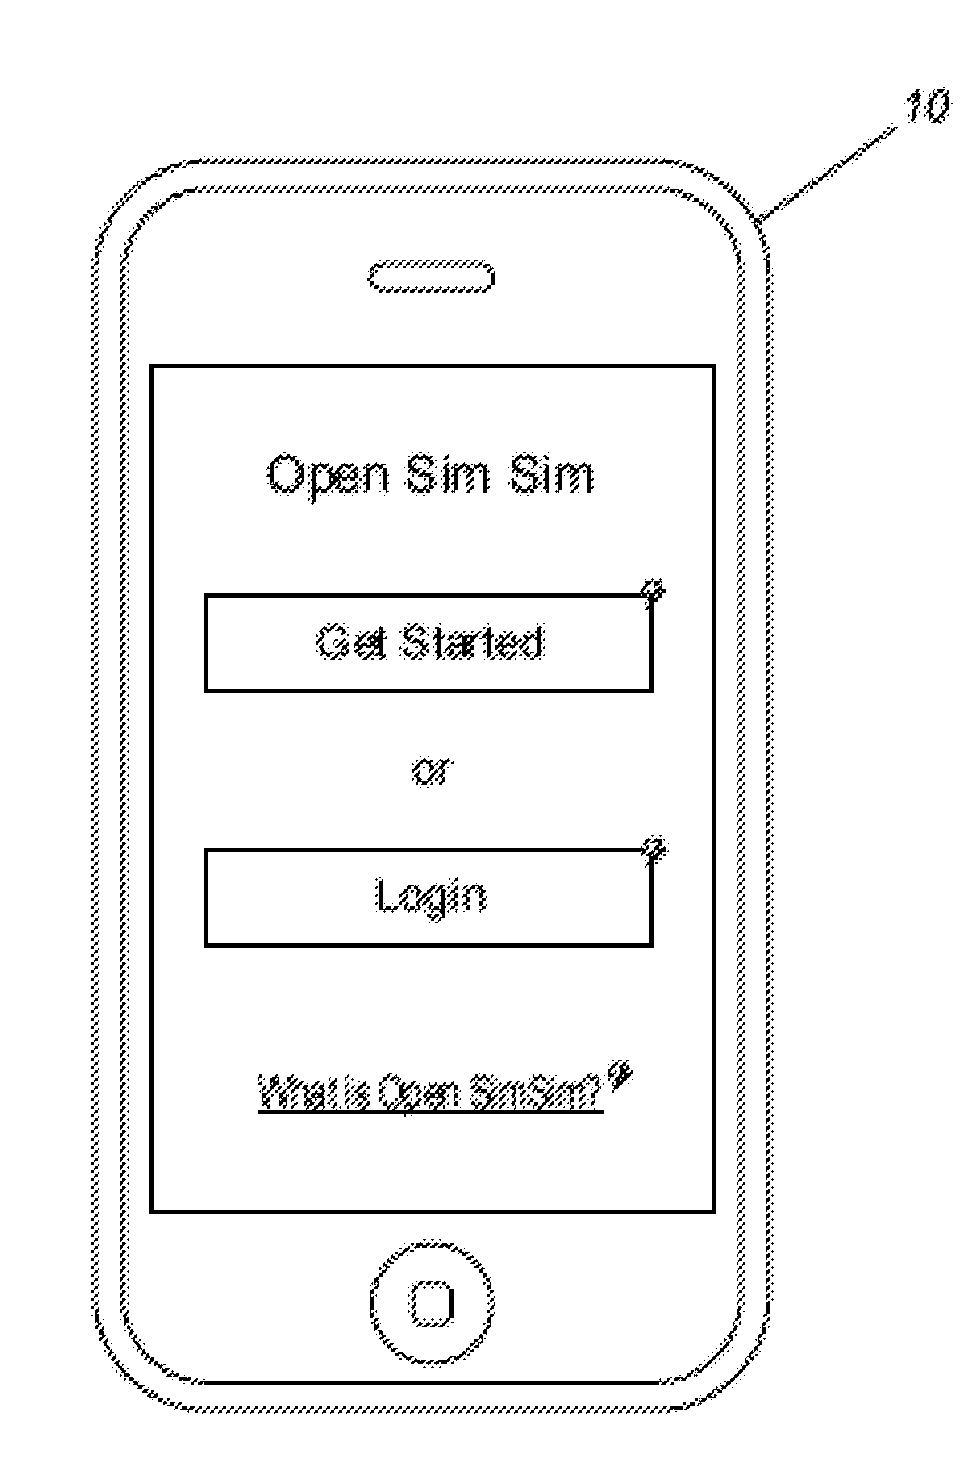 Mobile device and web based implemented application to optimize employment and methods of use thereof